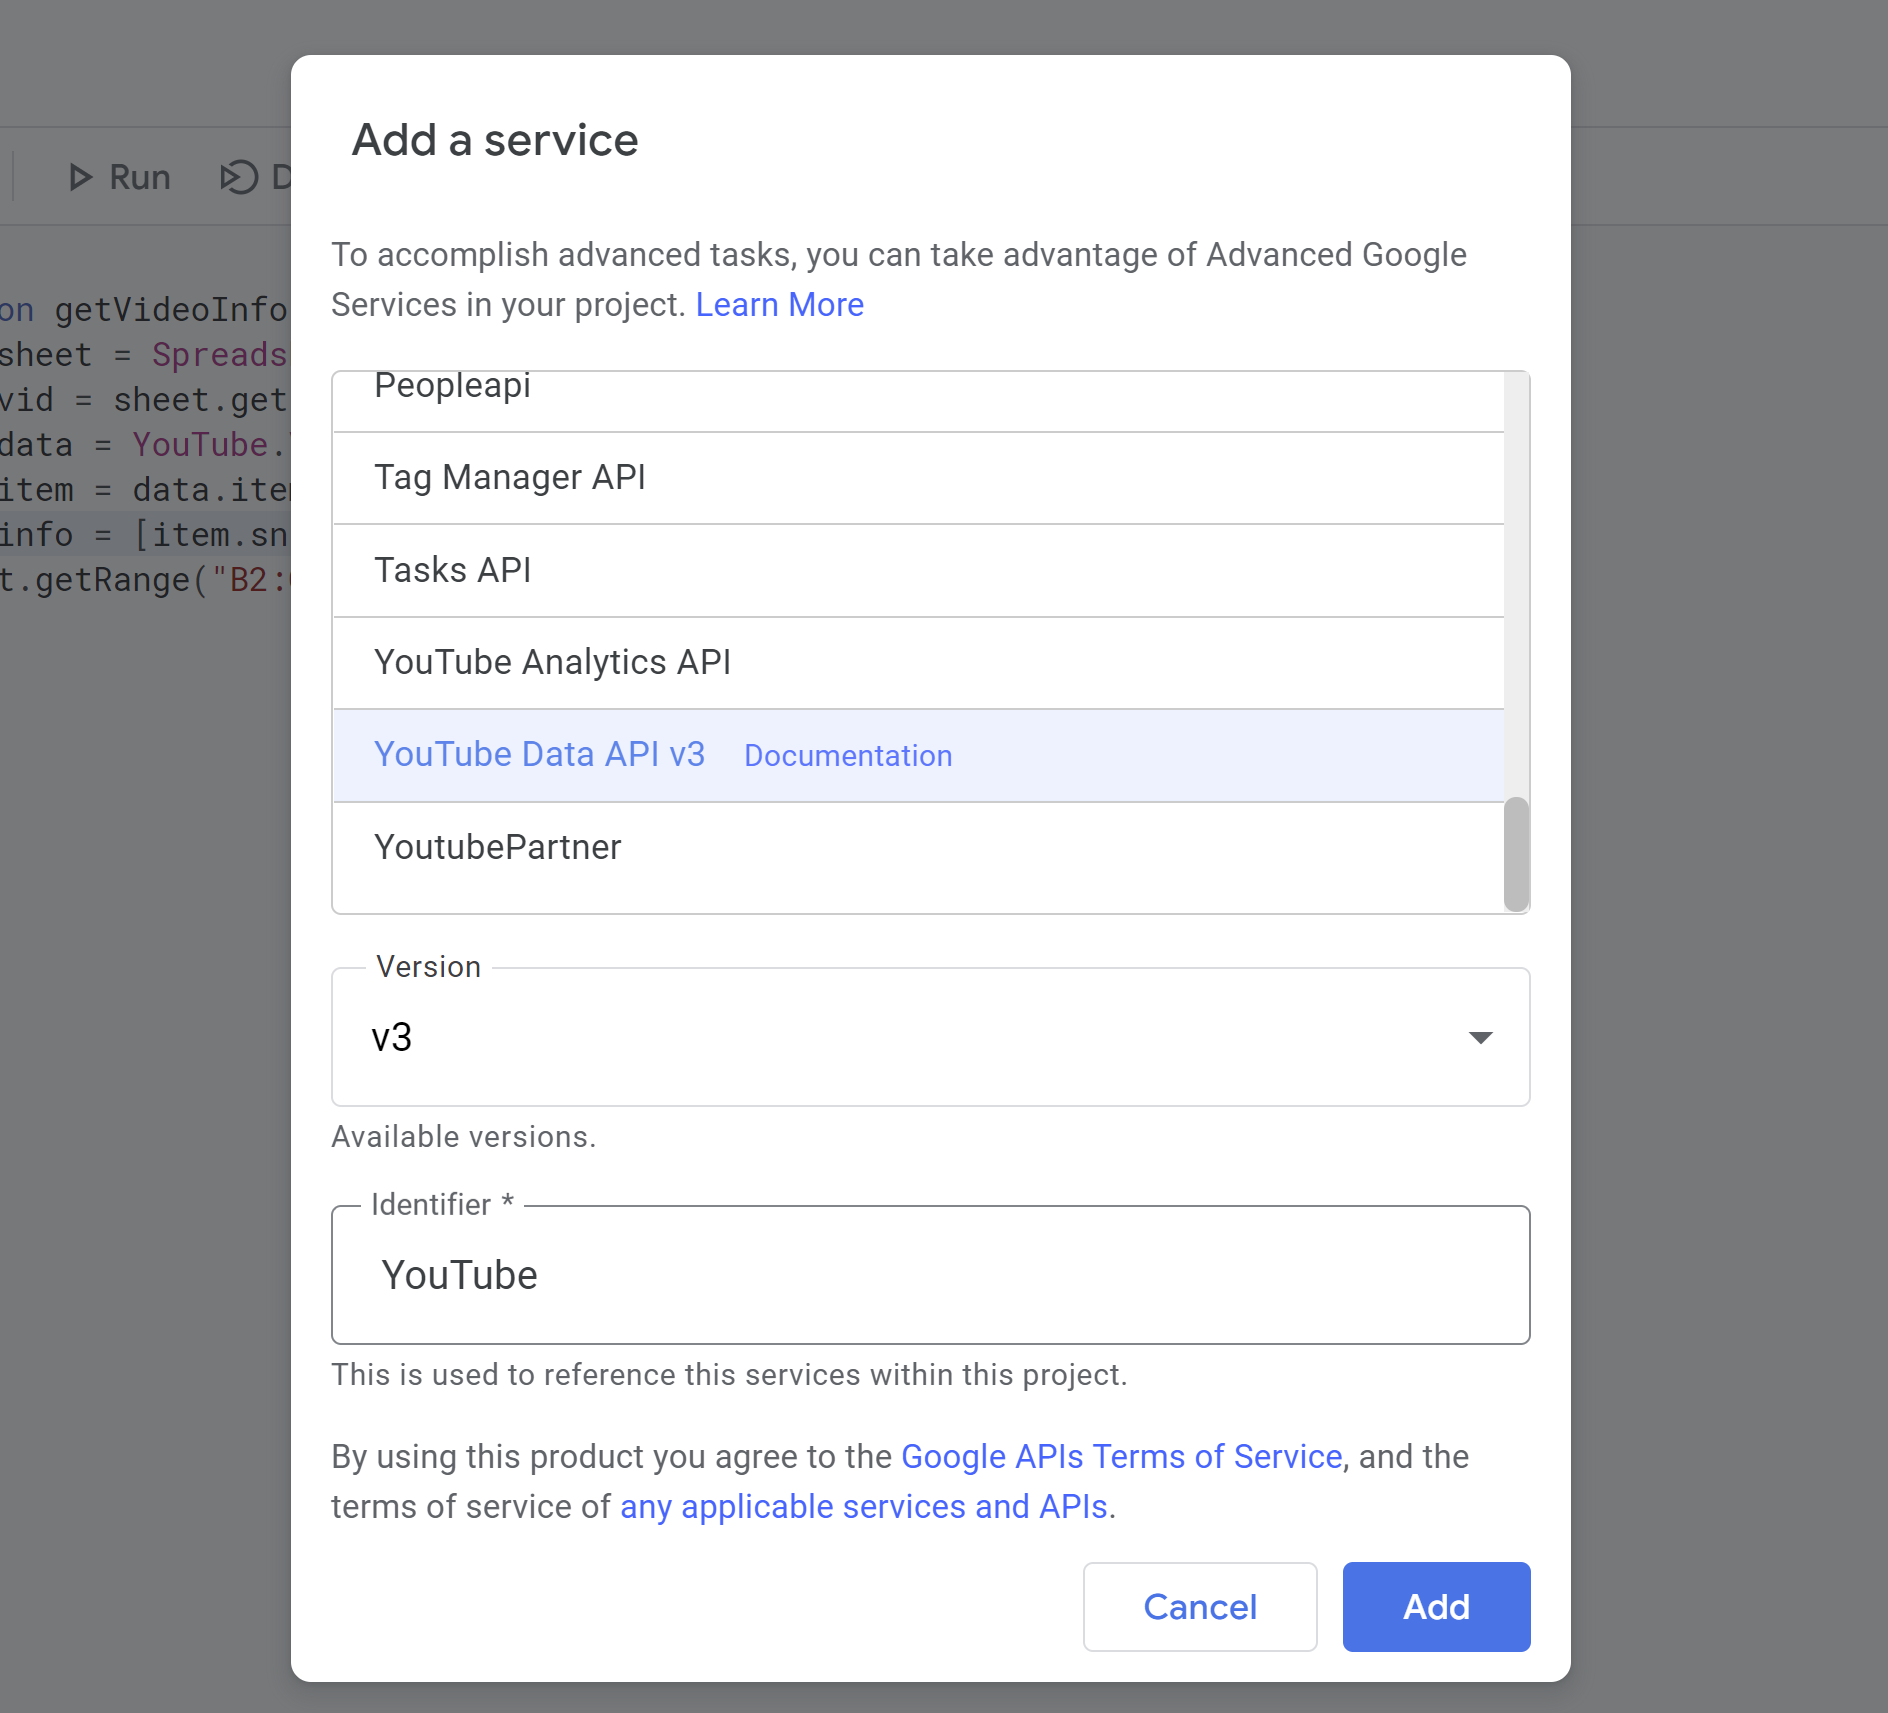 The Add a Service dialog box. The YouTube Data API v3 contains a link to the documentation link and can be identified with “YouTube”.